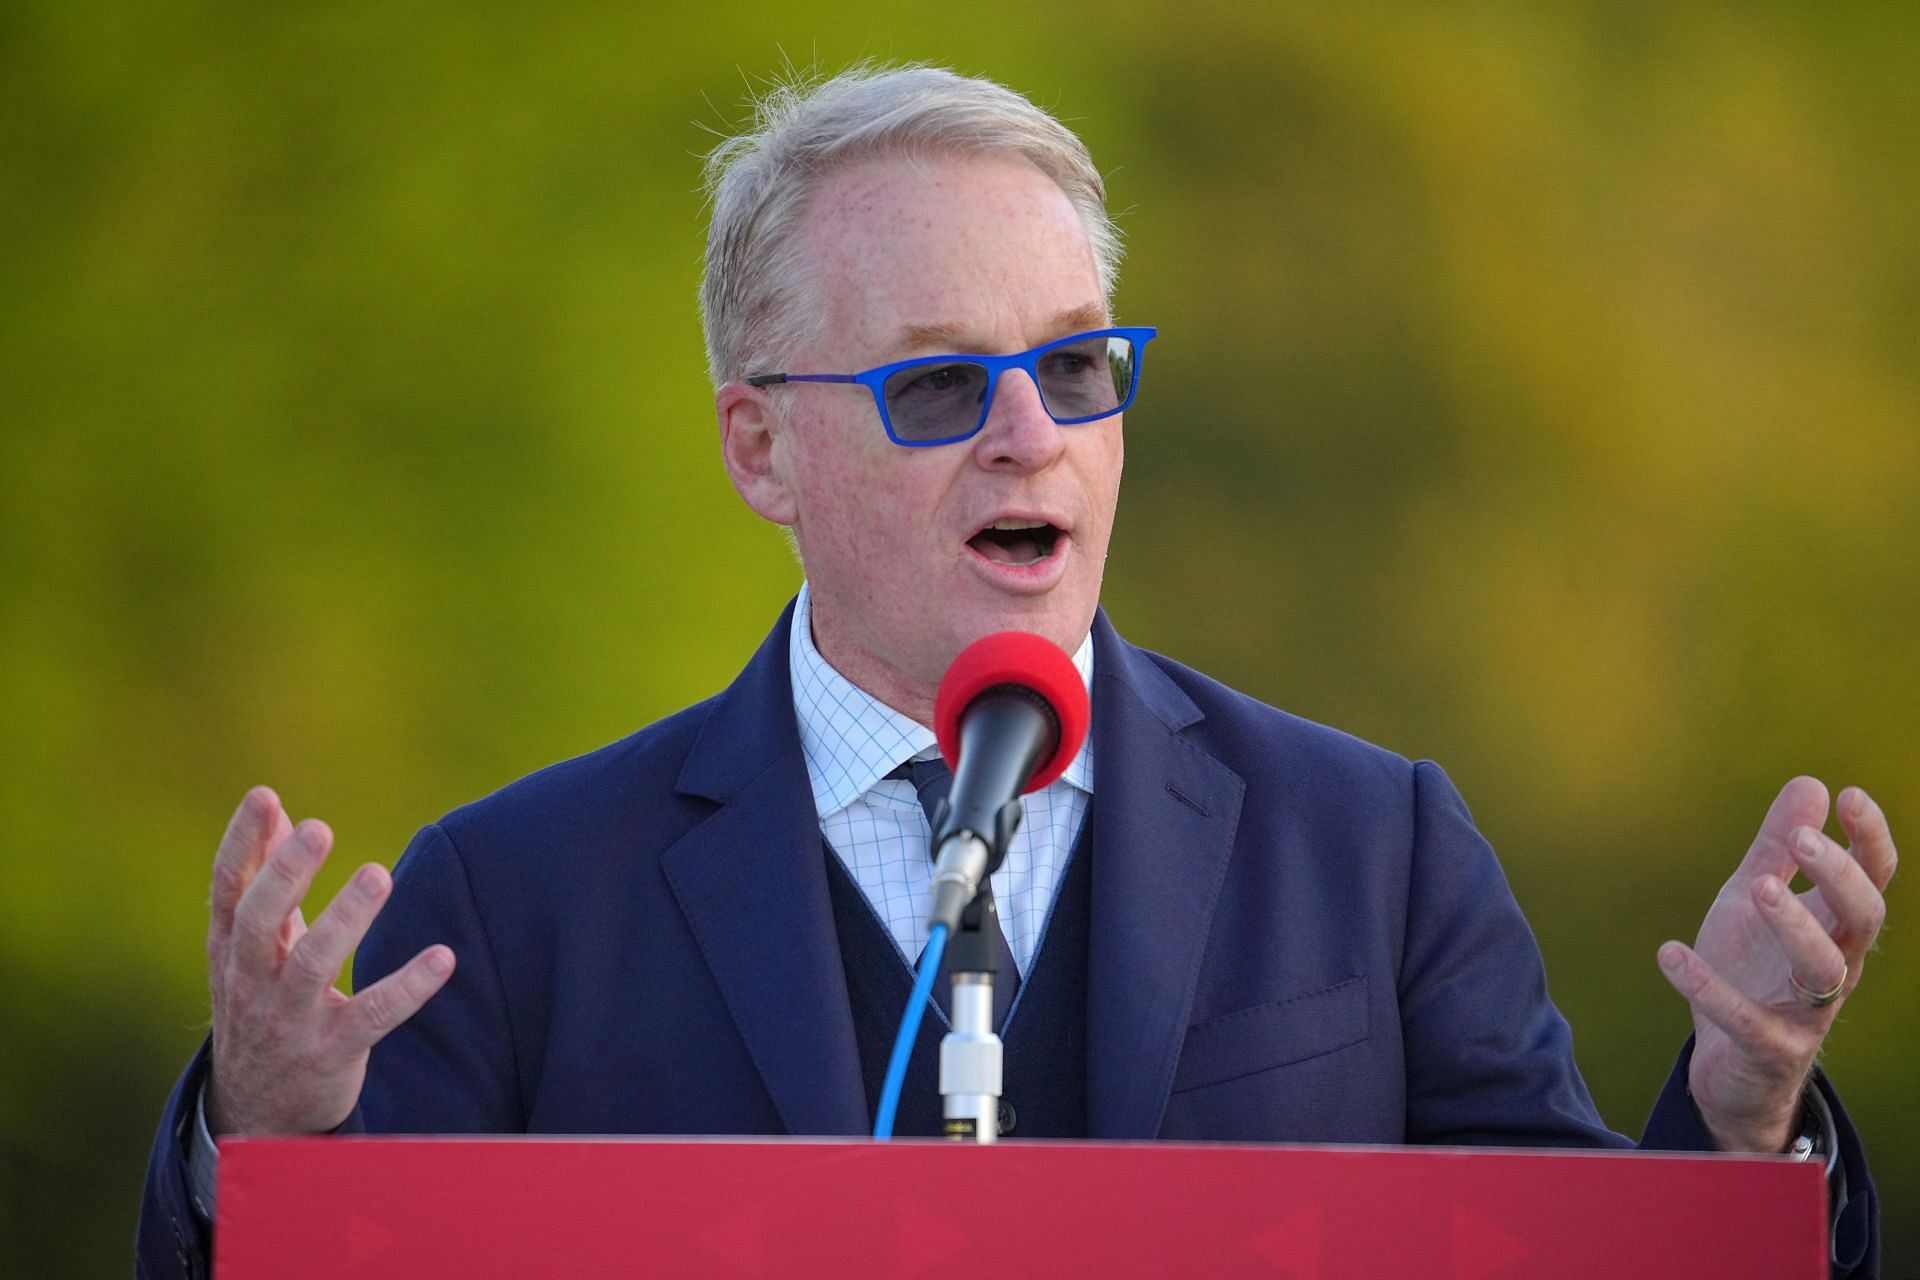 Keith Pelley spoke on the state of the sport